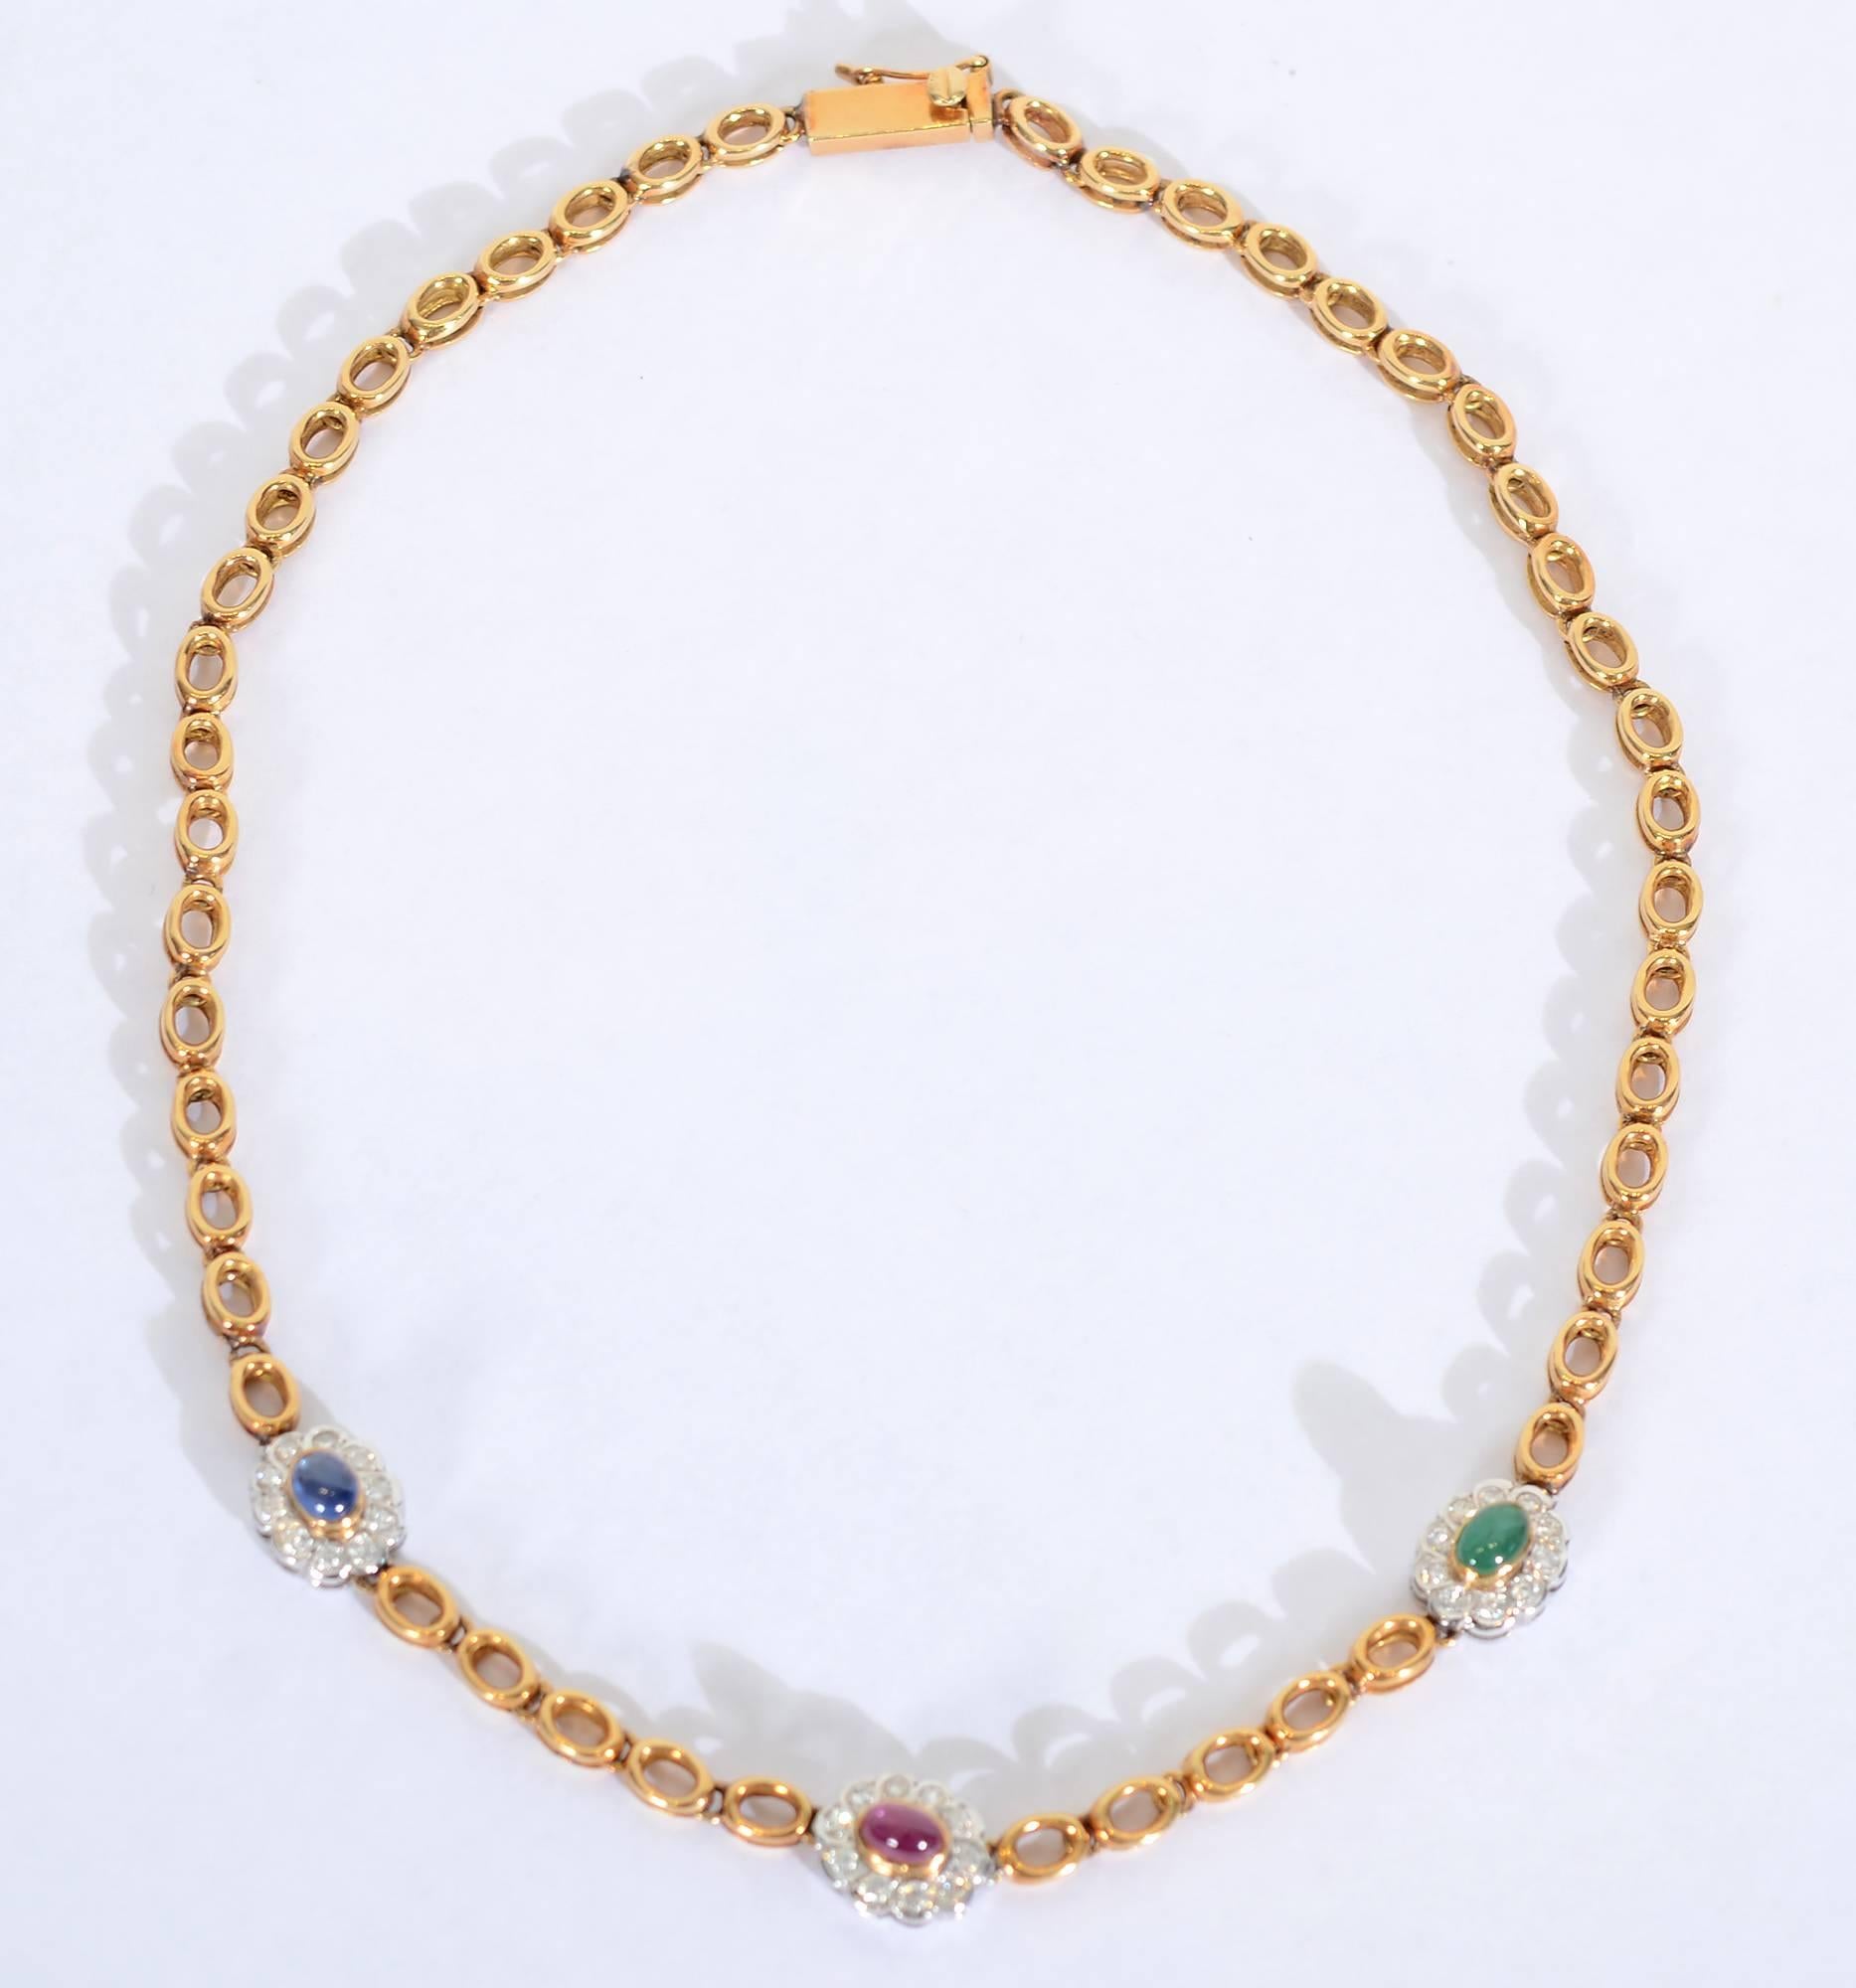 Custom made necklace with unusual links. Two ovals are set upon one another with a small space so the ovals do not touch created by a round link between them. The necklace is embellished with a sapphire; an emerald and a ruby in the center. Each of